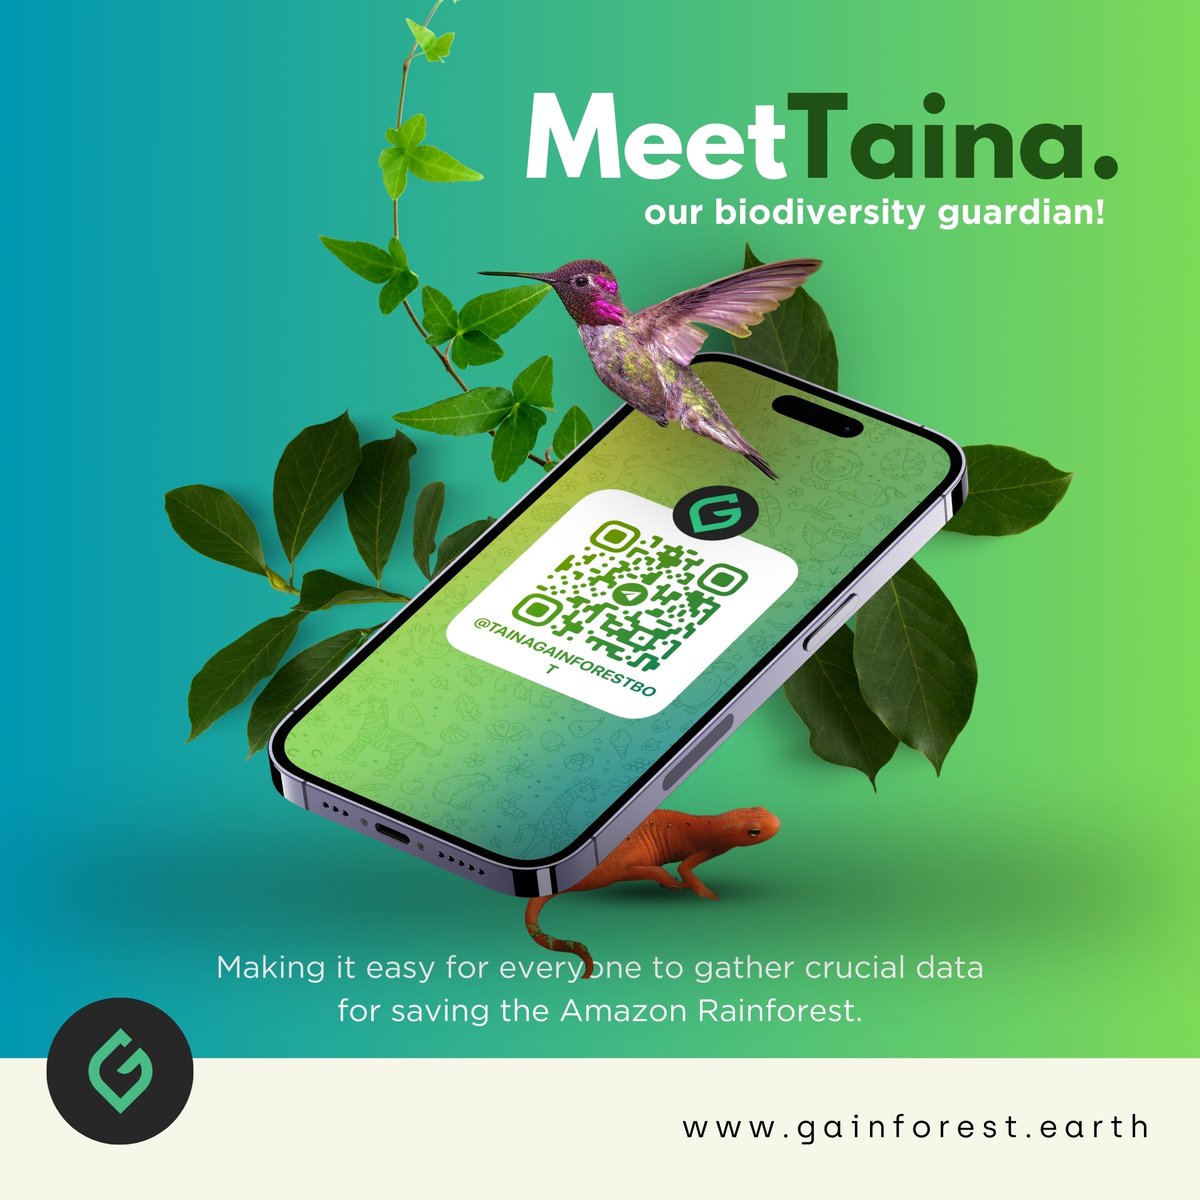 #MeetTaina, our Amazon biodiversity ally! 🦋 With Taina, gathering crucial data for preserving the Amazon's rich biodiversity is as easy as a friendly chat. Yaaas! Want to join our upcoming #citizenscience knowledge-sharing sessions and get hands-on with Taina? Follow our pages…